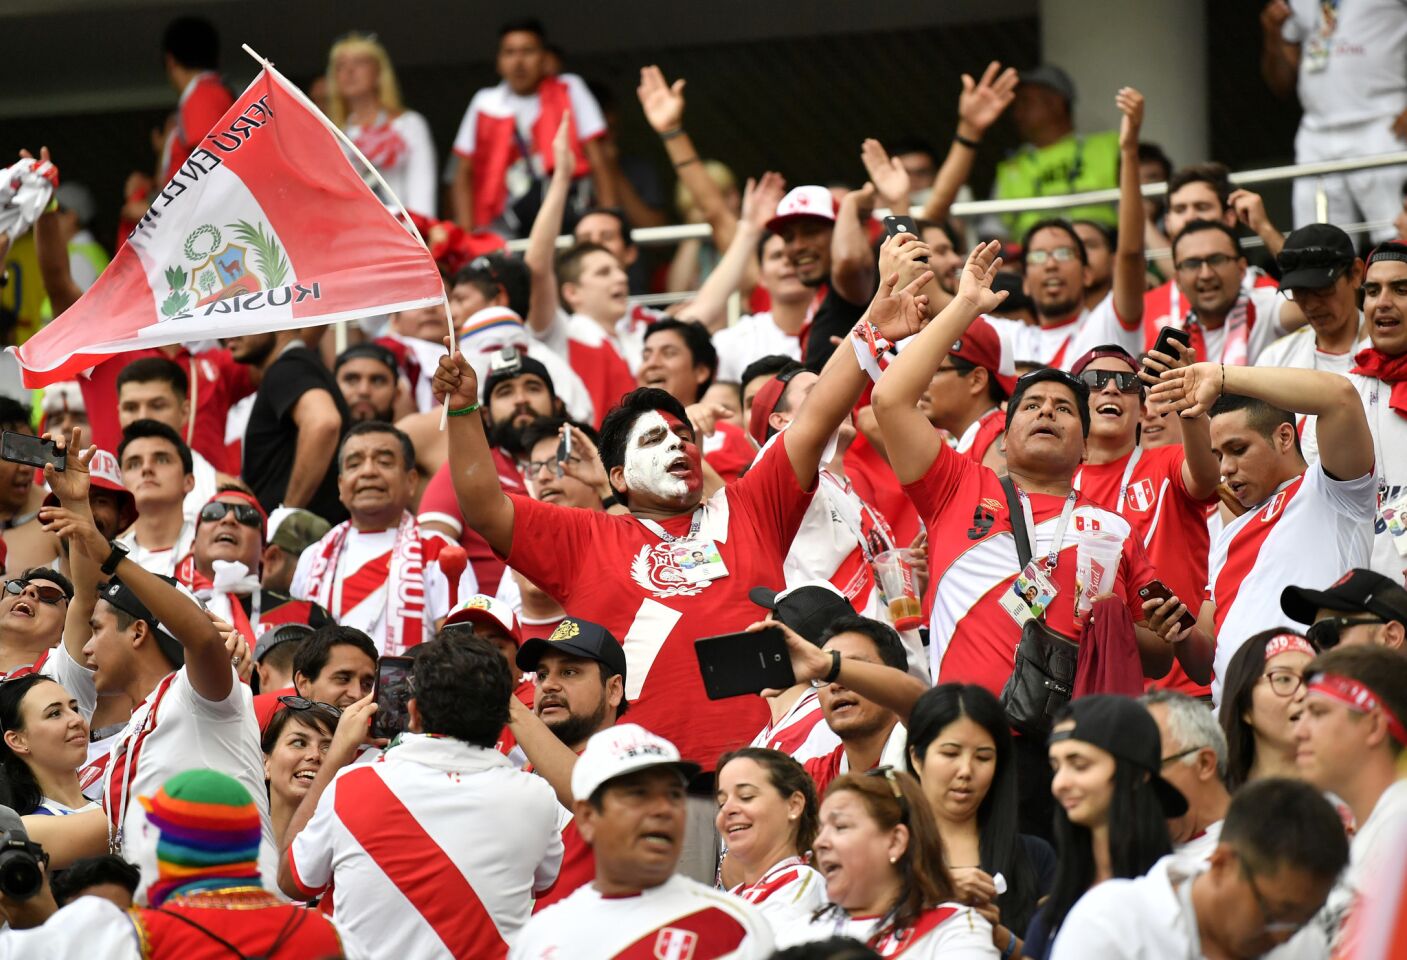 Peru fans cheer after their team won 2-0 during the group C match between Australia and Peru, at the 2018 soccer World Cup in the Fisht Stadium in Sochi, Russia, Tuesday, June 26, 2018. (AP Photo/Martin Meissner)